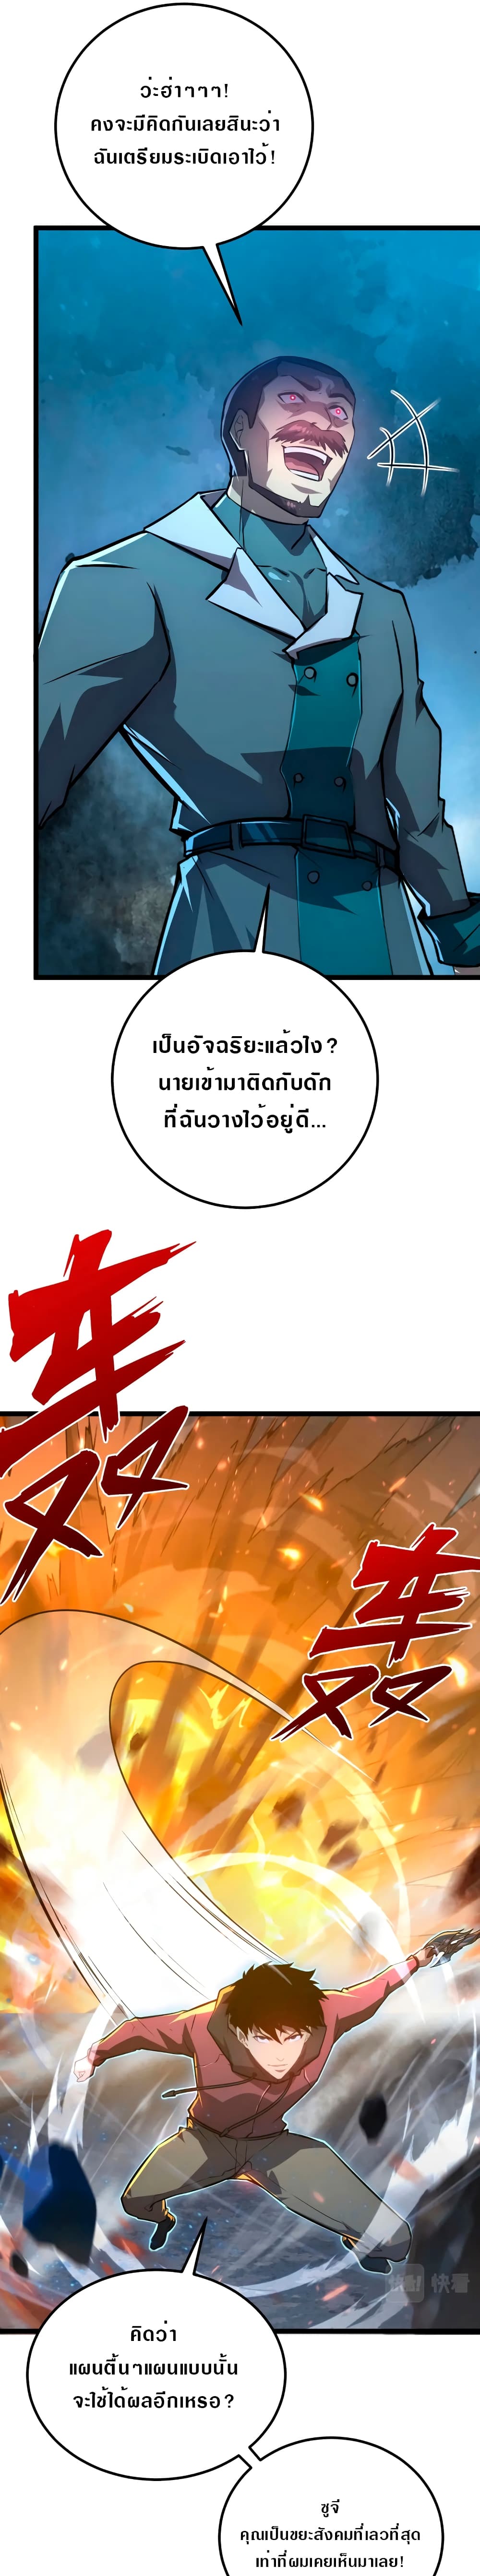 Rise From The Rubble เศษซากวันสิ้นโลก 133-133